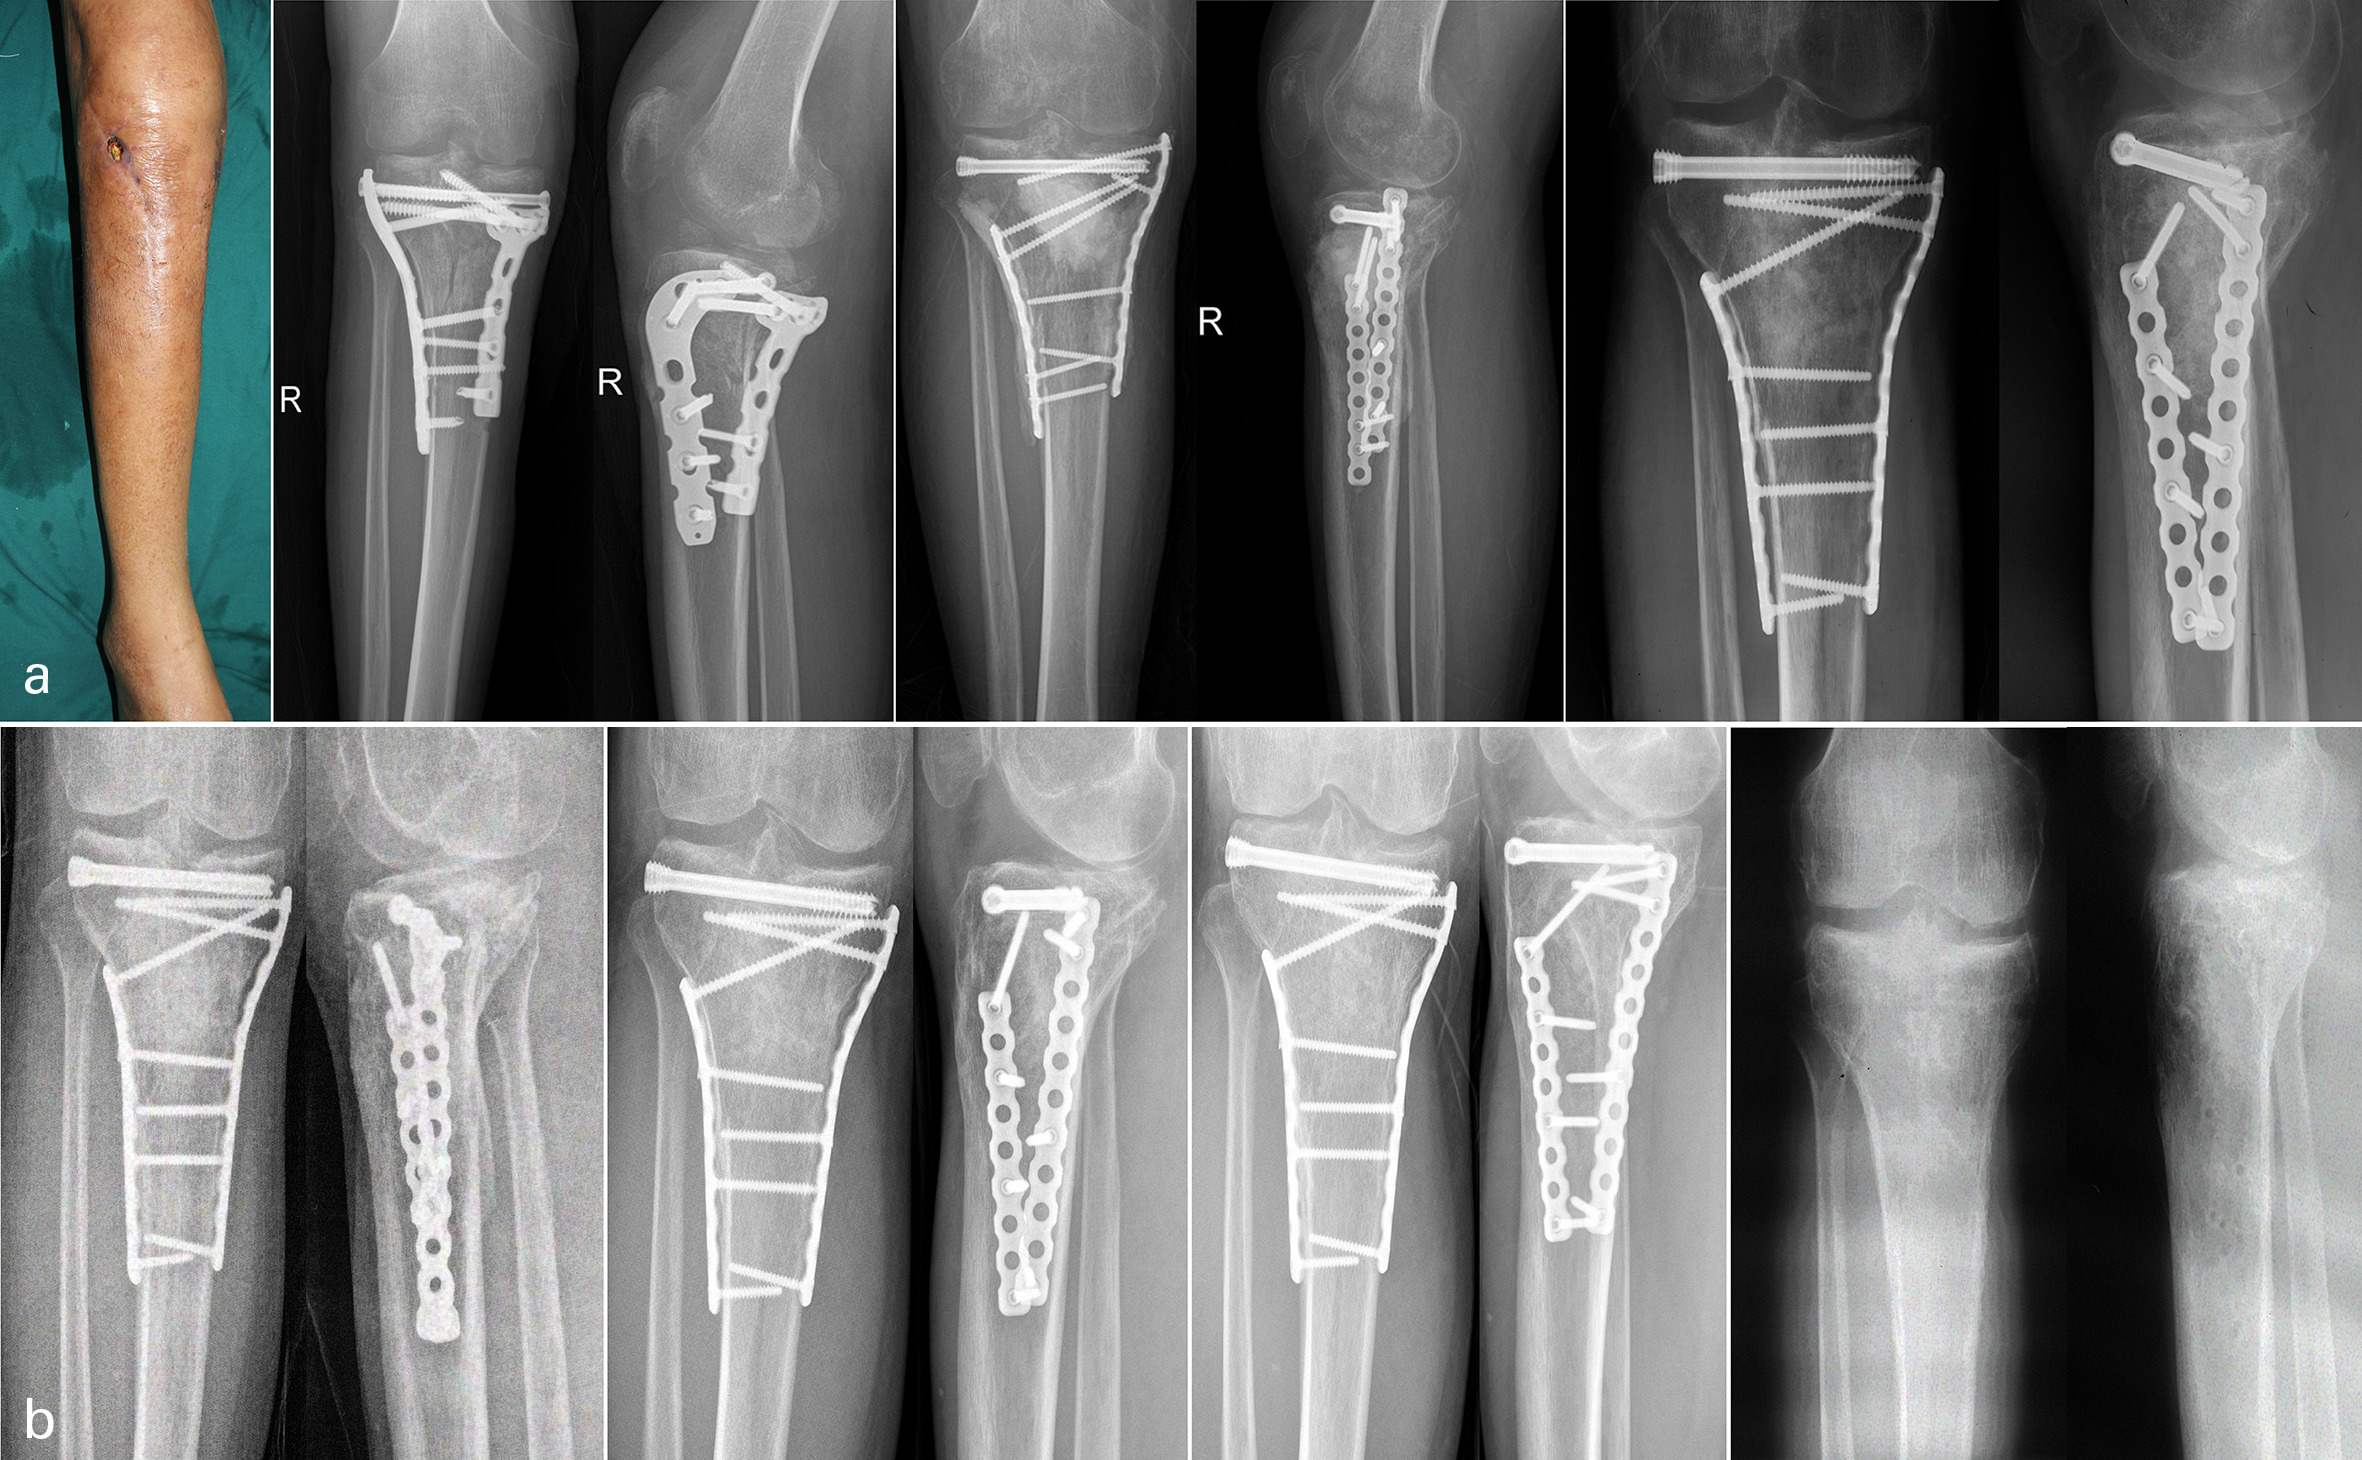 Fig. 2 
          Two-stage treatment process of a 40-year-old male patient with a Schatzker V fracture. a) Anteroposterior (AP) and lateral radiographs before operation. Plate exposure seen prior to operation (photograph). First-stage postoperative AP and lateral radiograph showed that bone defect was filled with antibiotic bone cement spacer, and the locking plate and hollow screw were used as internal fixator to limb stabilization. Second-stage postoperative AP and lateral radiographs demonstrating placement of iliac crest autograft after removal of spacer and replacement of implant to limb stabilization. b) Radiographs of three, 12, 24, and 30 months after bone grafting, where the implants were removed at 30 months, demonstrating the duration of bony consolidation.
        